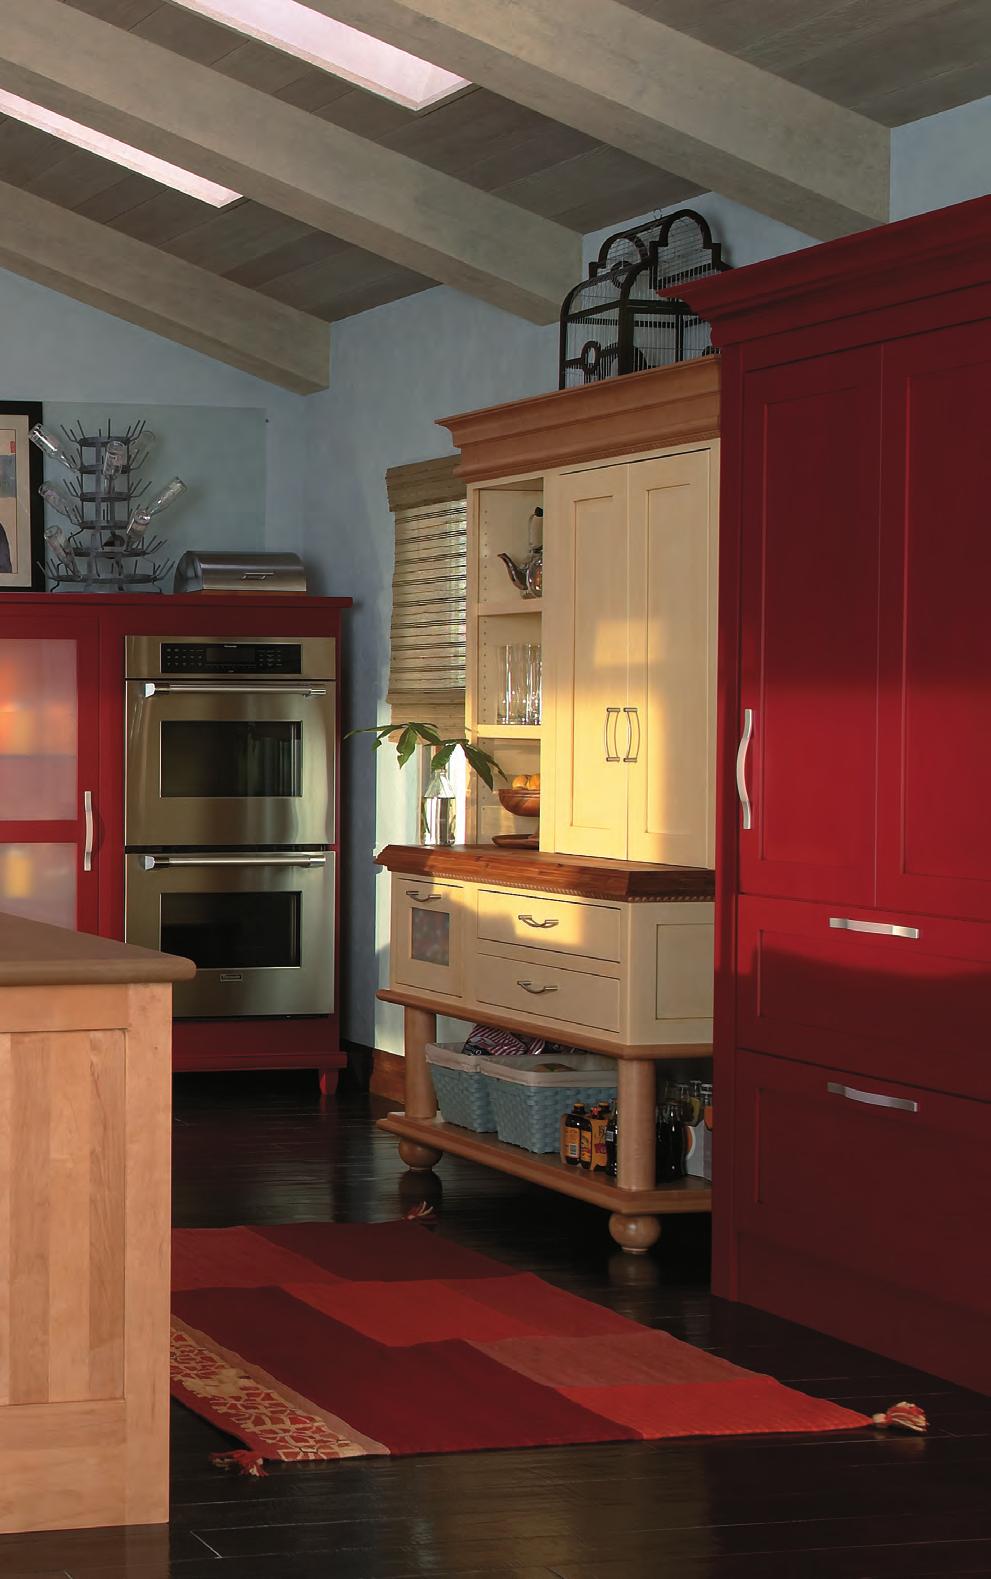 OASIS Bulky appliances don t need to dominate your design.